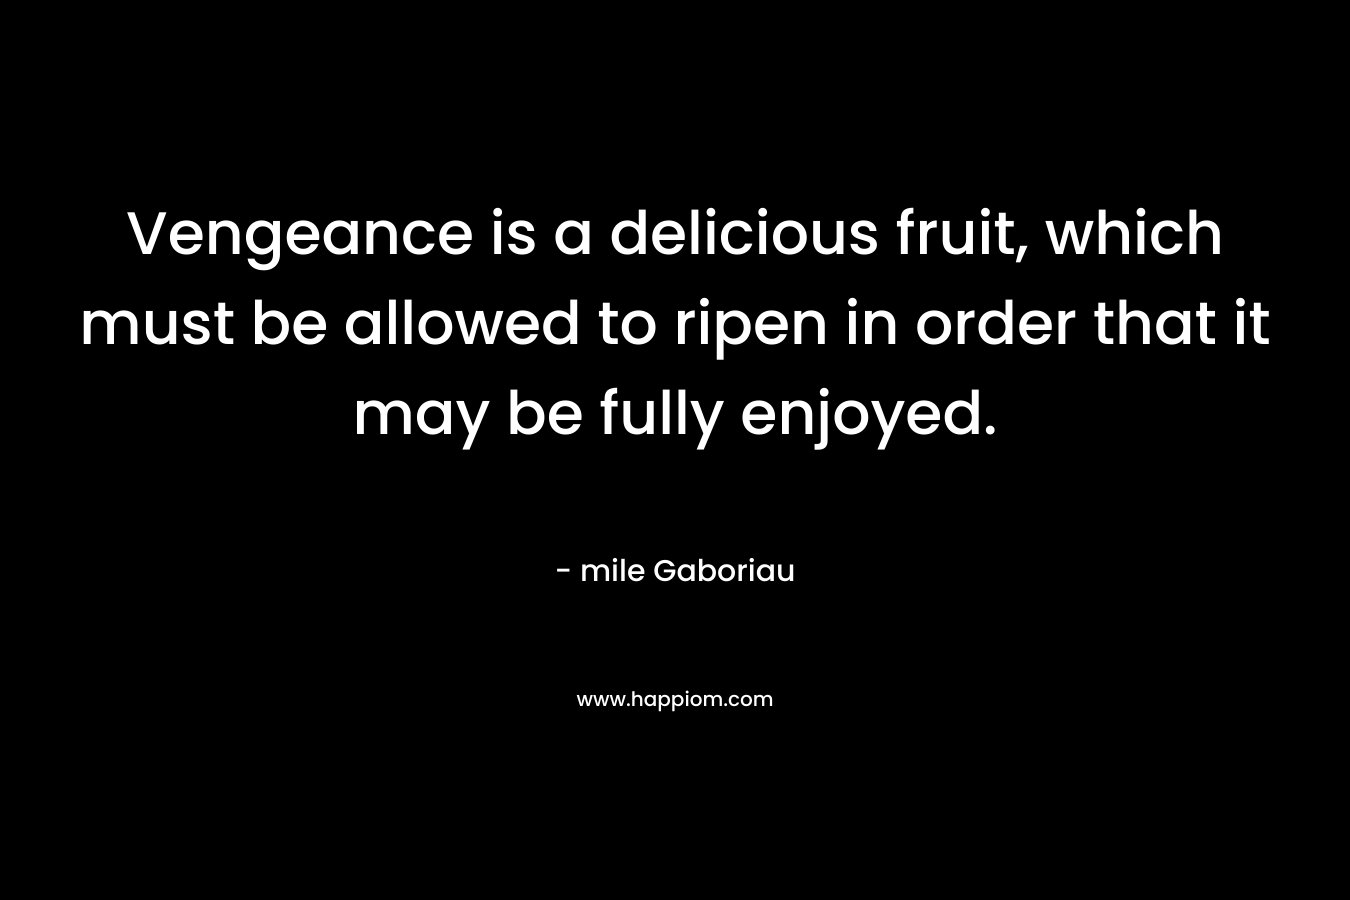 Vengeance is a delicious fruit, which must be allowed to ripen in order that it may be fully enjoyed. – mile Gaboriau